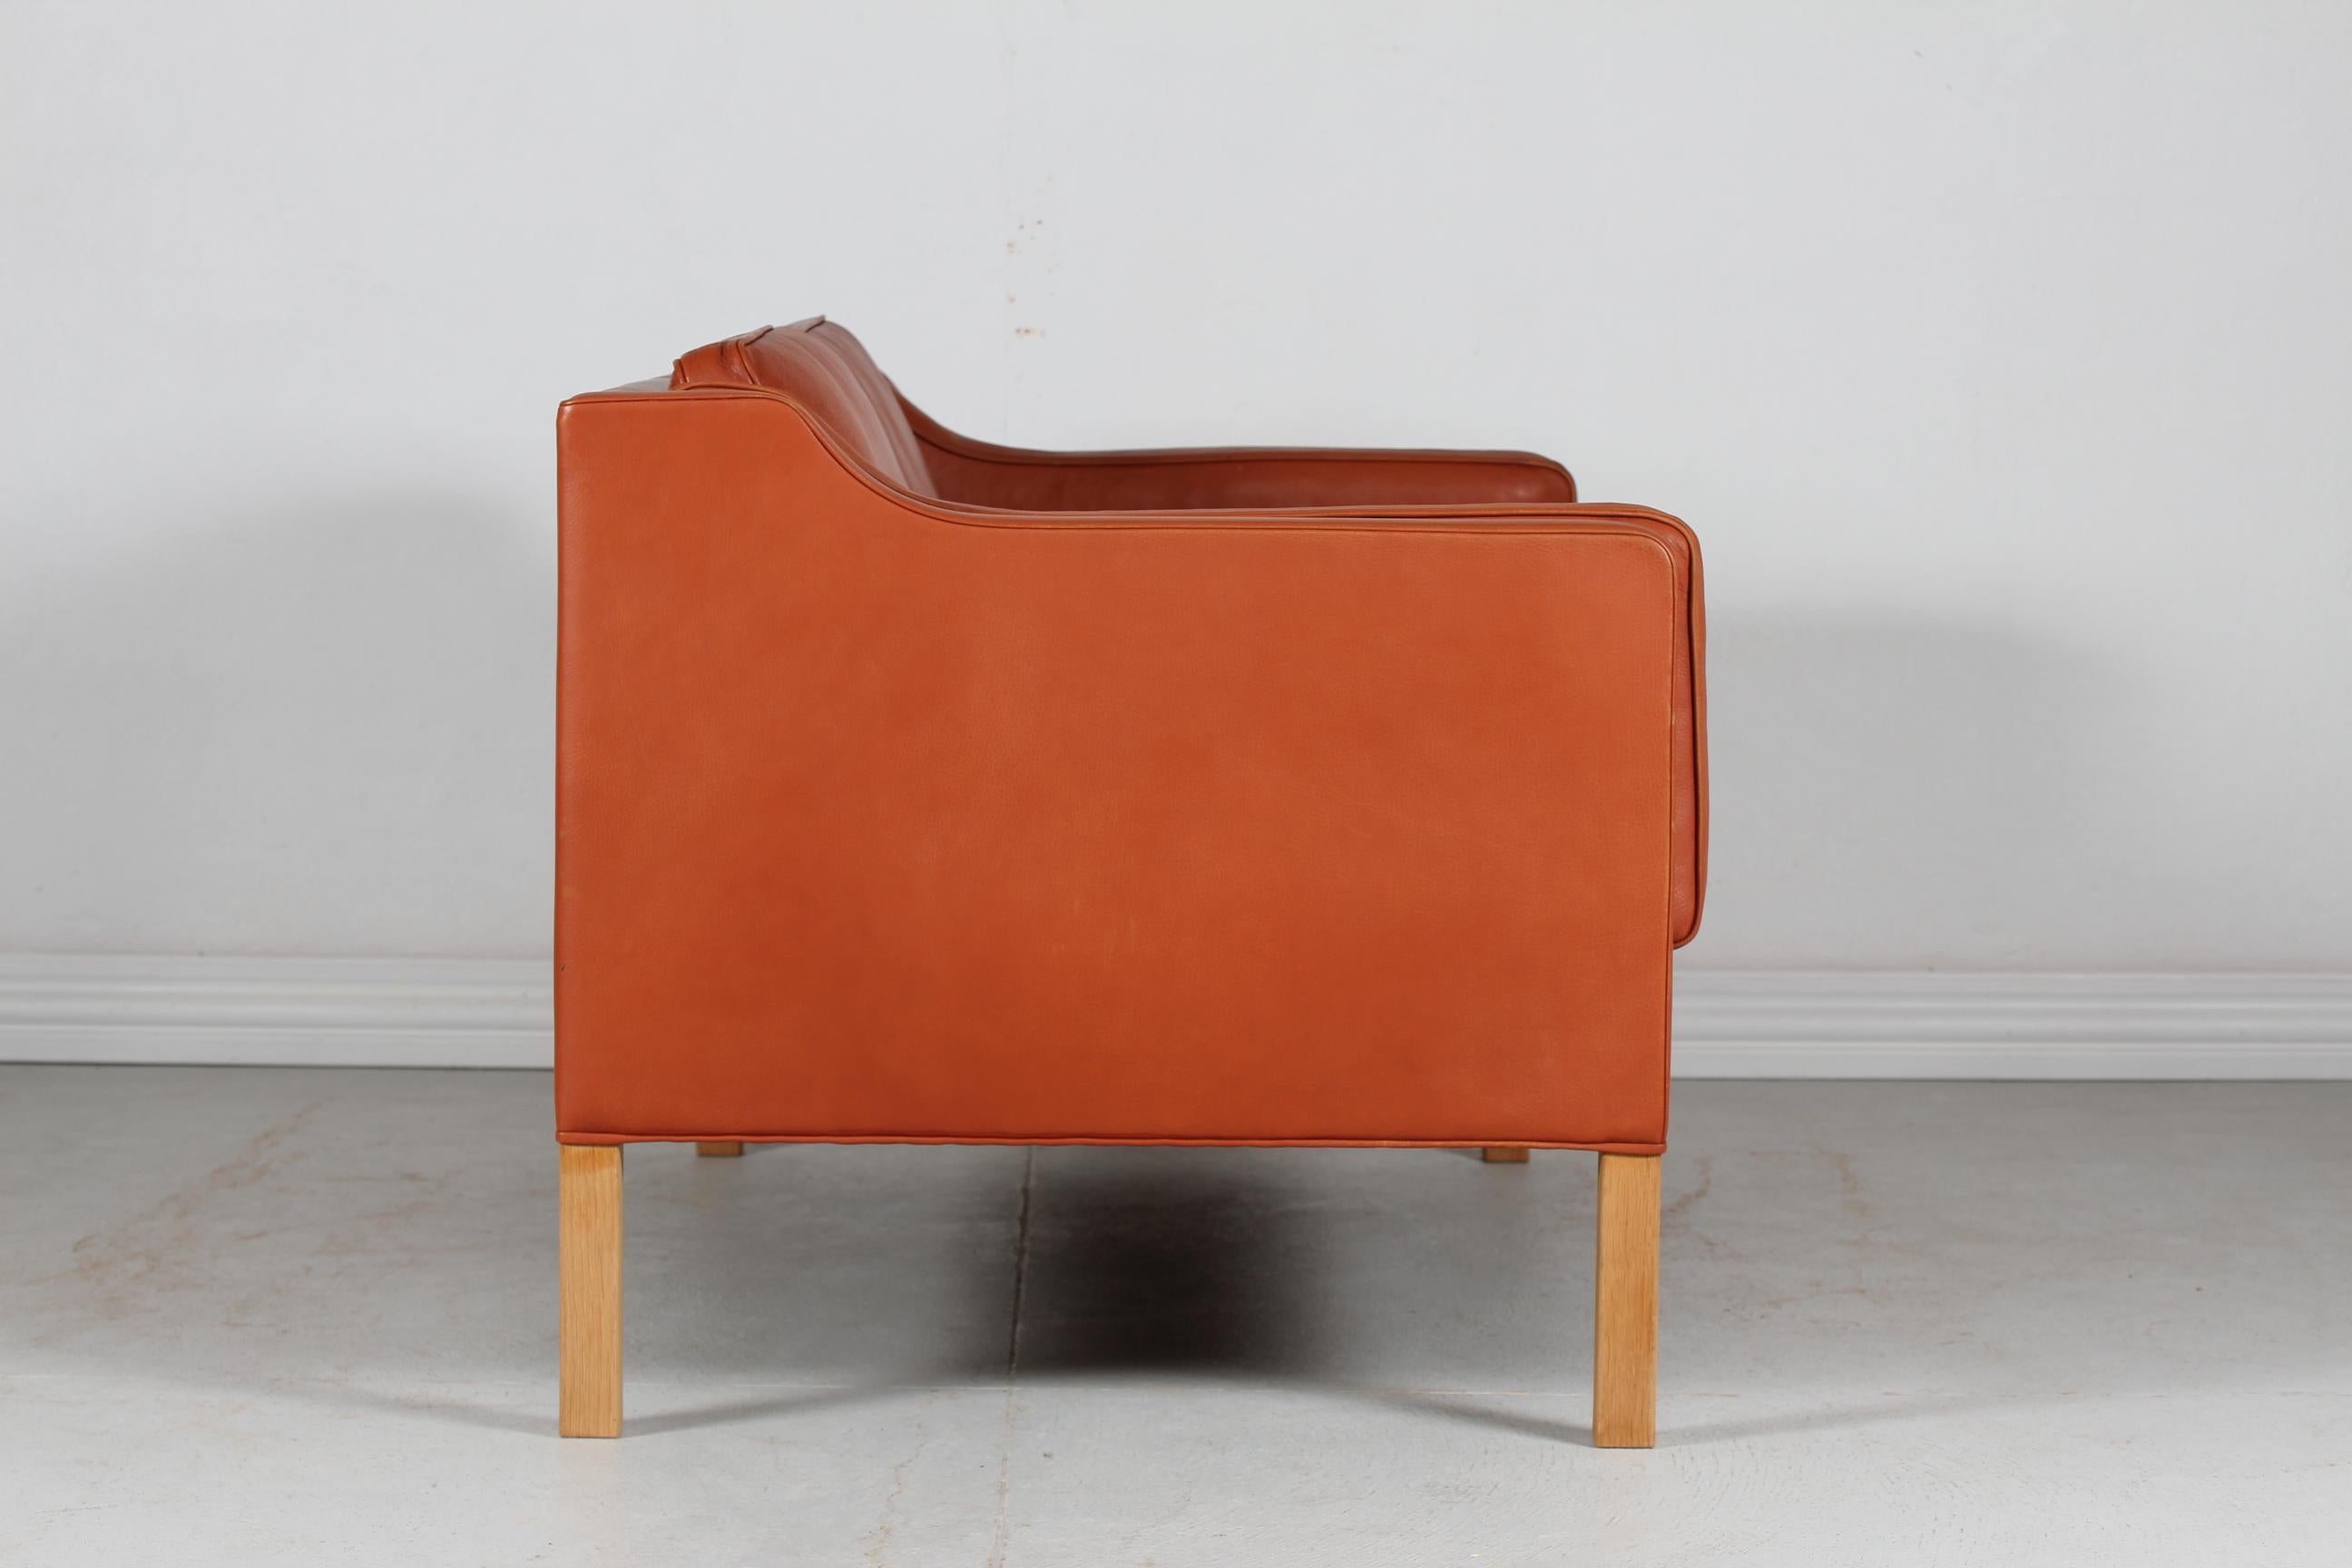 Mid-Century Modern Børge Mogensen Sofa 2212 Cognac Colored Leather and Oak by Fredericia Furniture